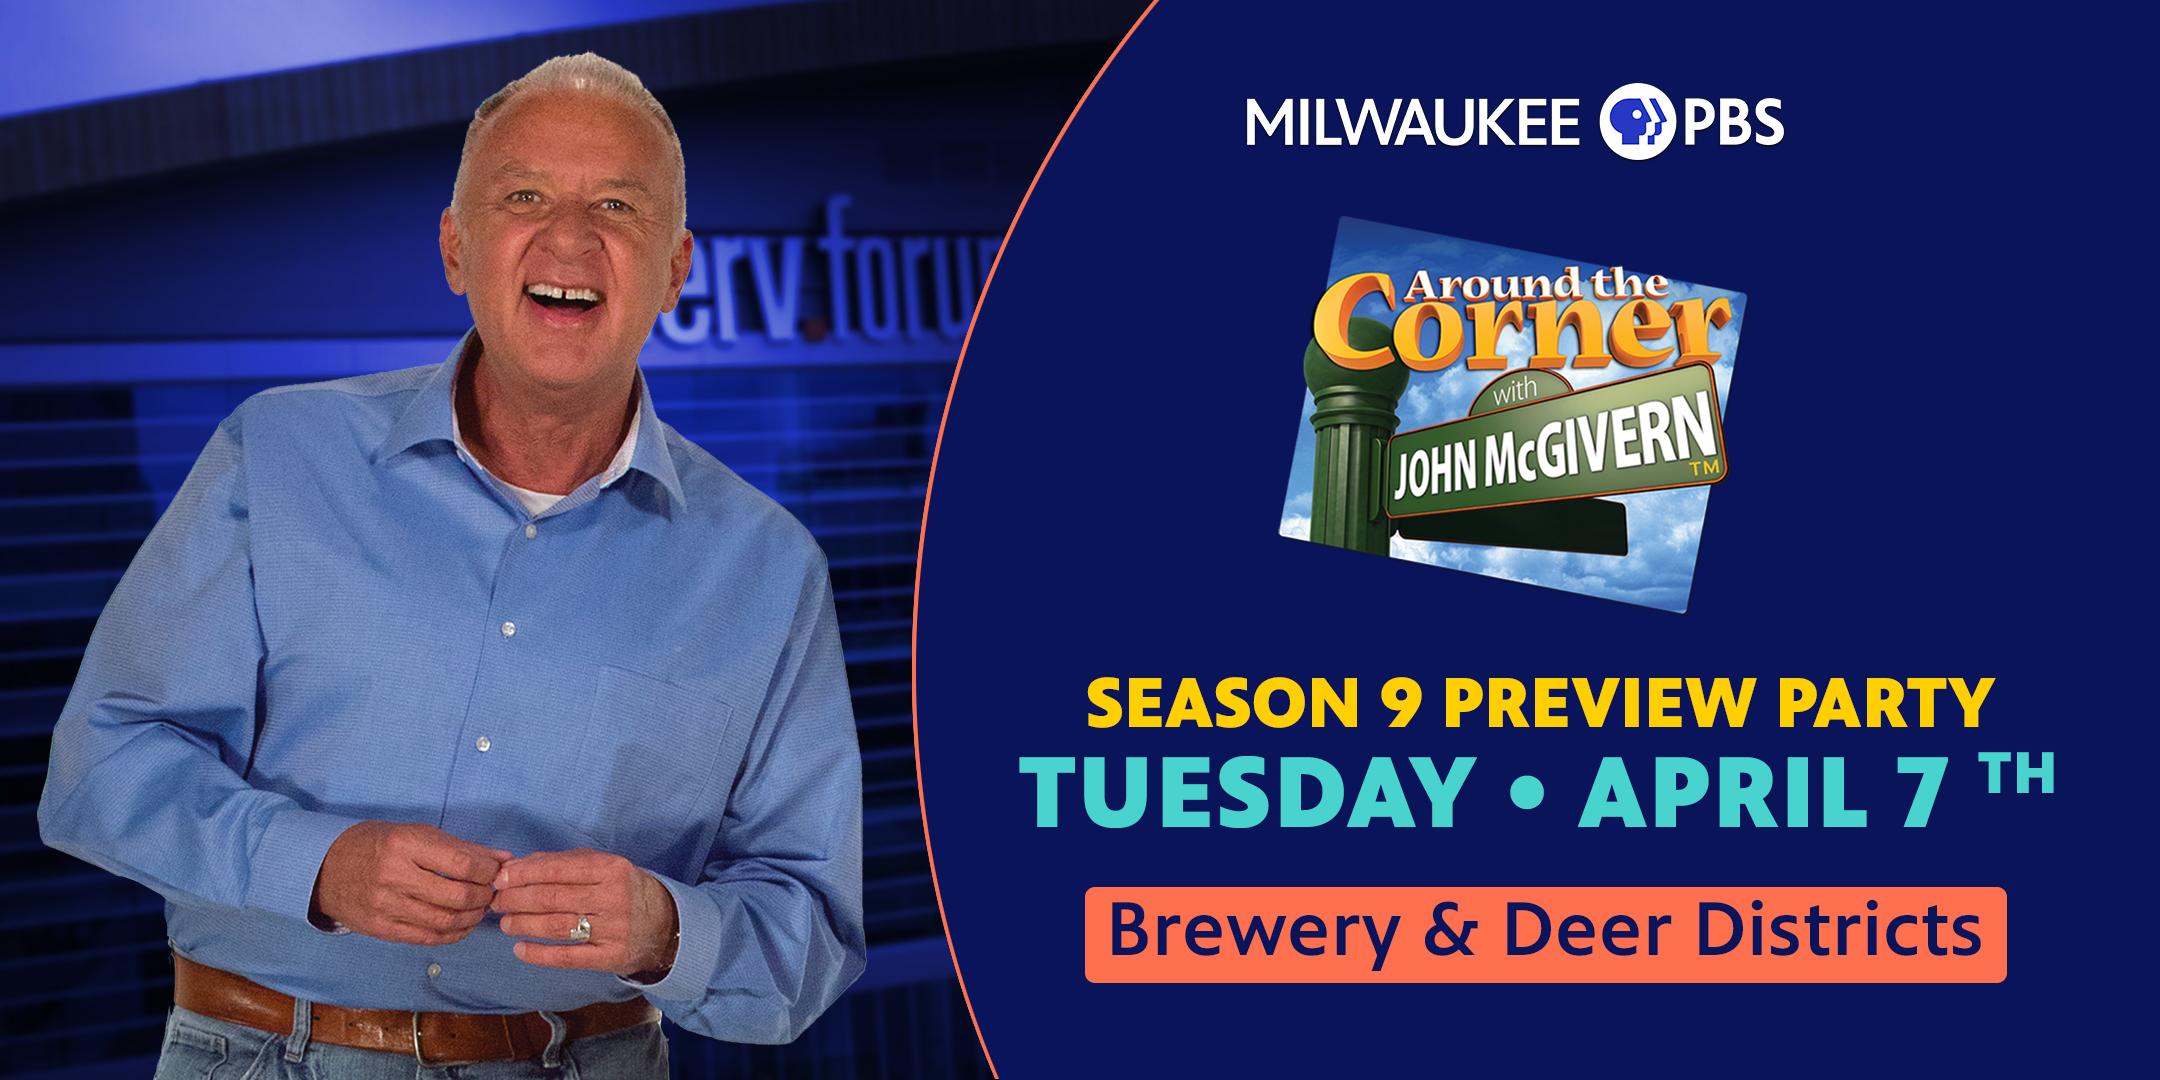 Milwaukee PBS Around the Corner with John McGivern Preview Party